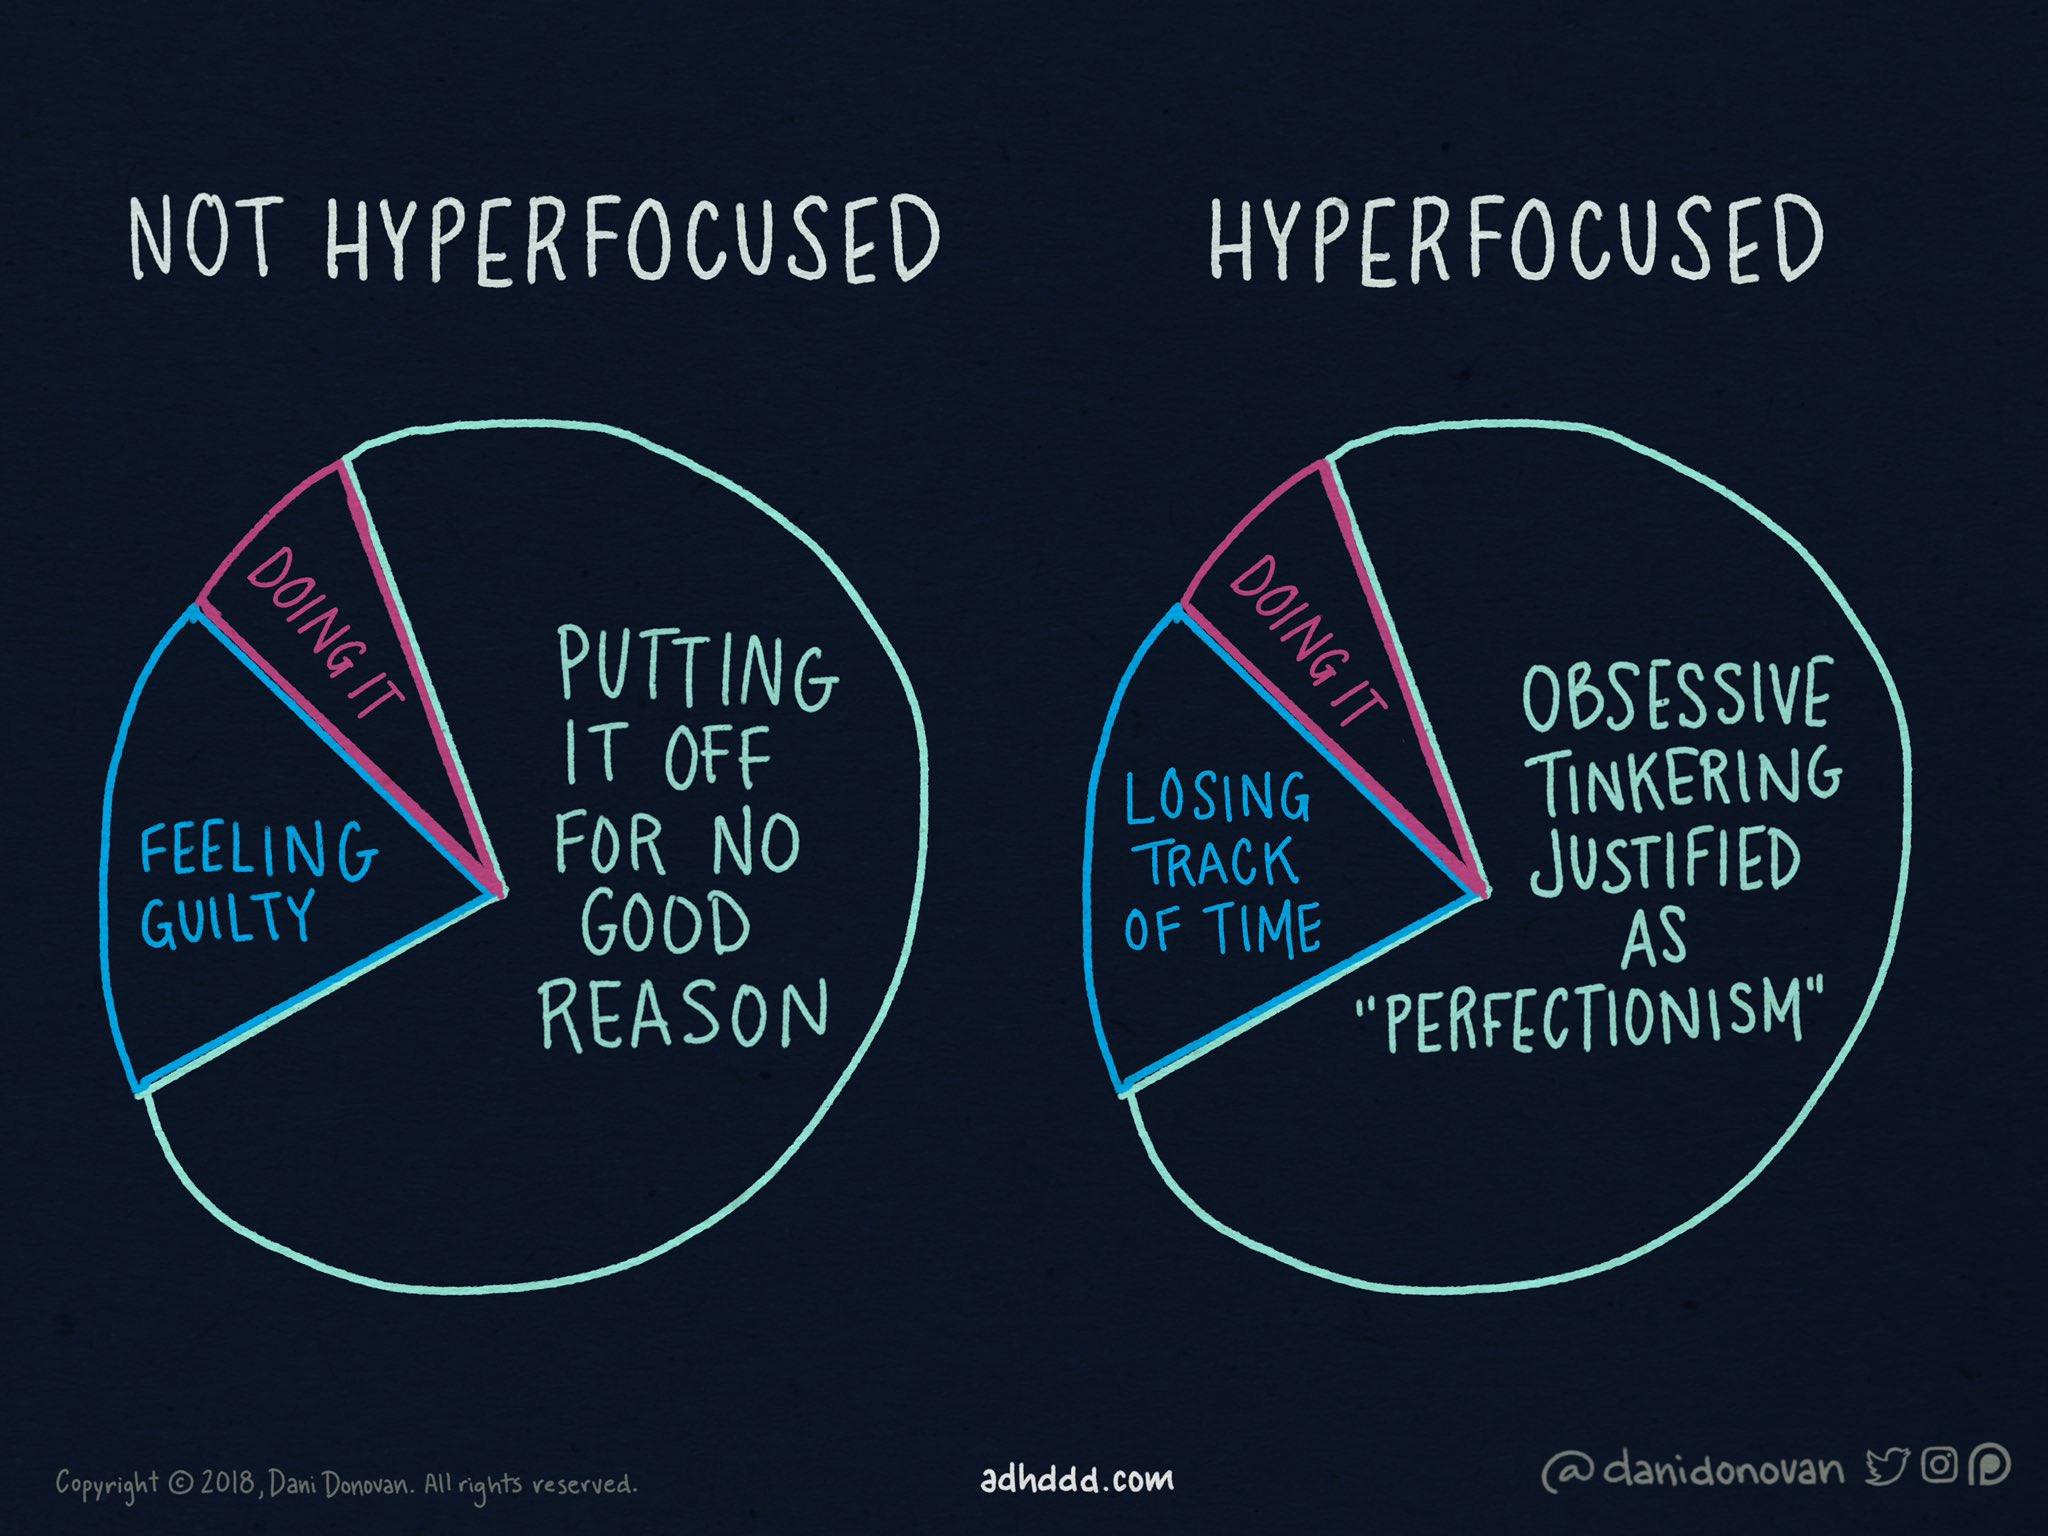 Not hyperfocused pie chart: sliver of doing it, small piece of feeling guilty, and 3/4 putting it off for not good reason Hyperfocused pie chart: sliver of doing it, small piece of losing track of time, 3/4 obsessive tinkering justified as "perfectionism"